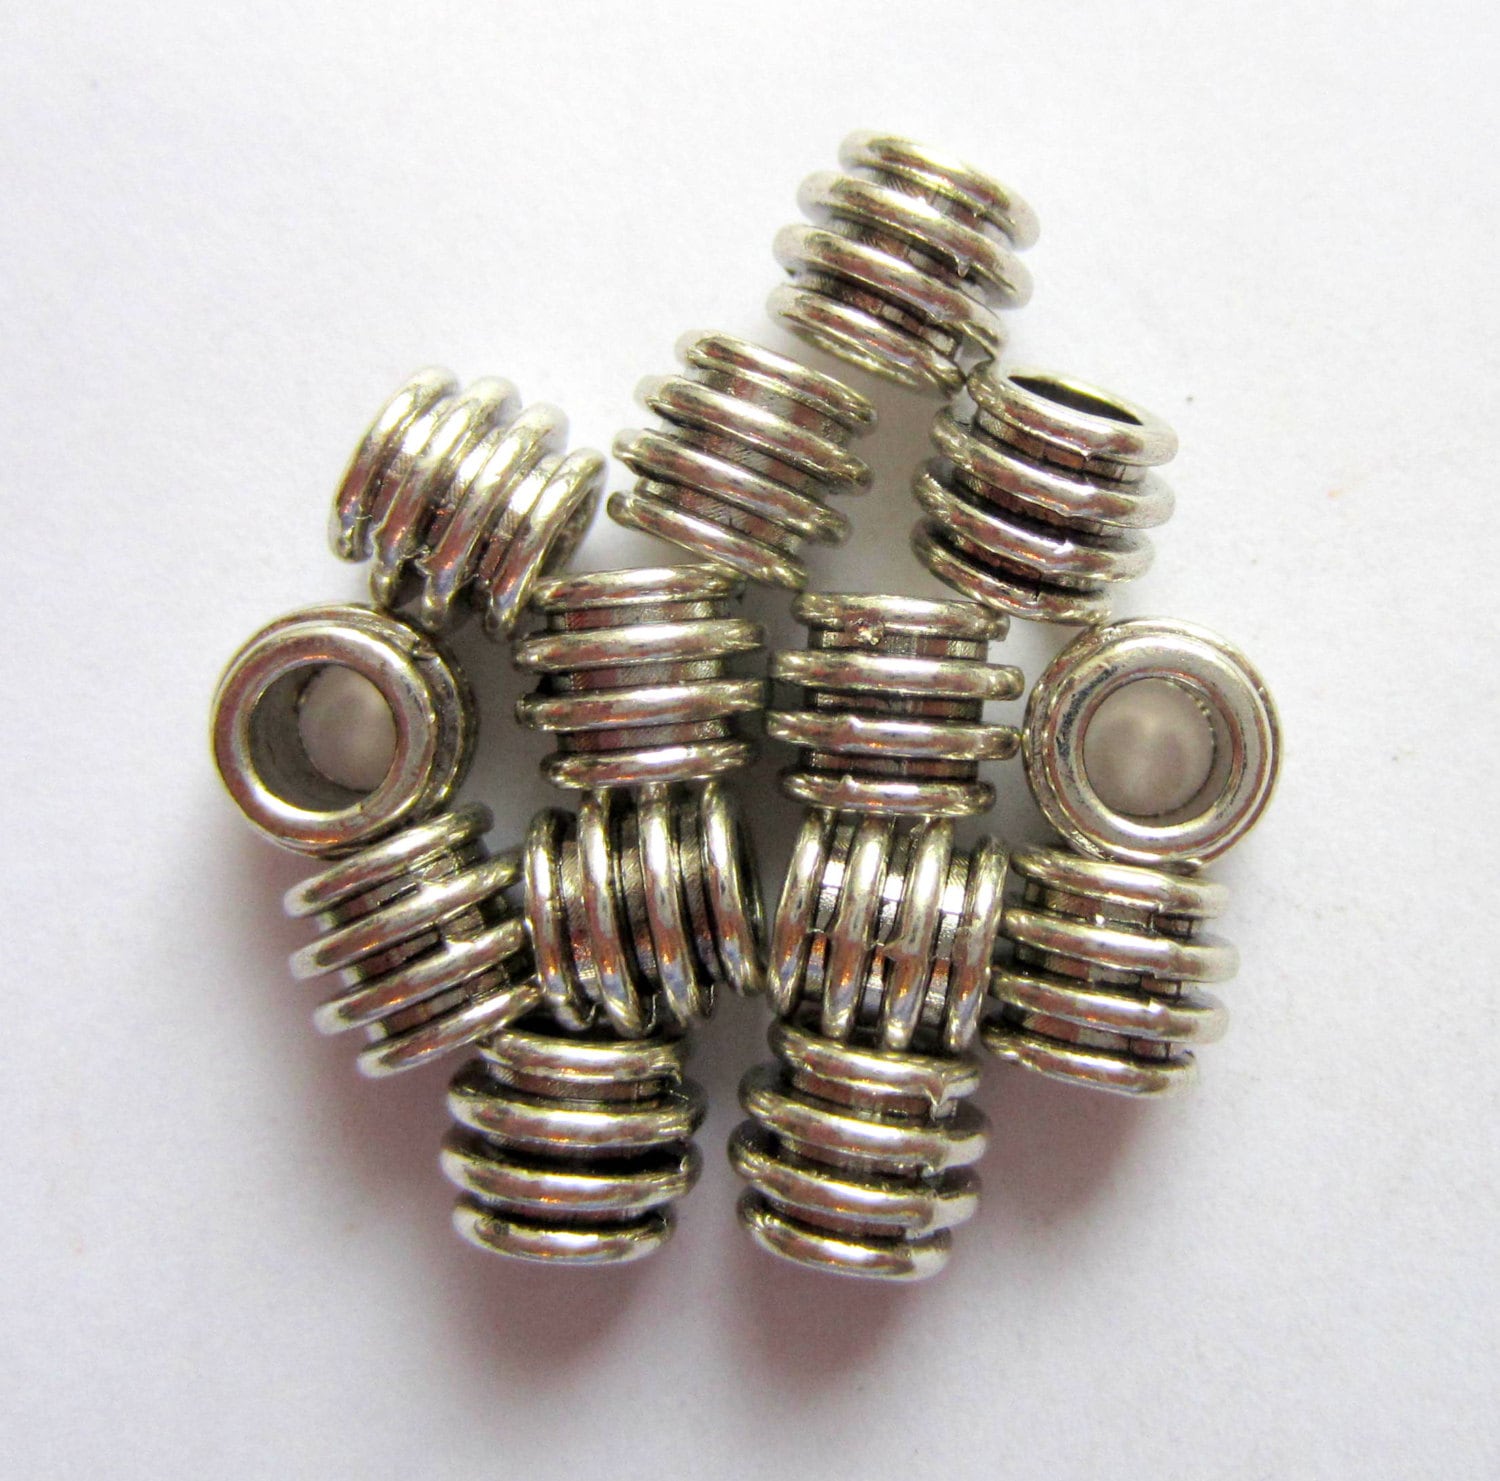 10mm 8pc Round Silver Beads for Jewelry Making, Brushed Silver Spacer  Beads, Metal Ball Beads 